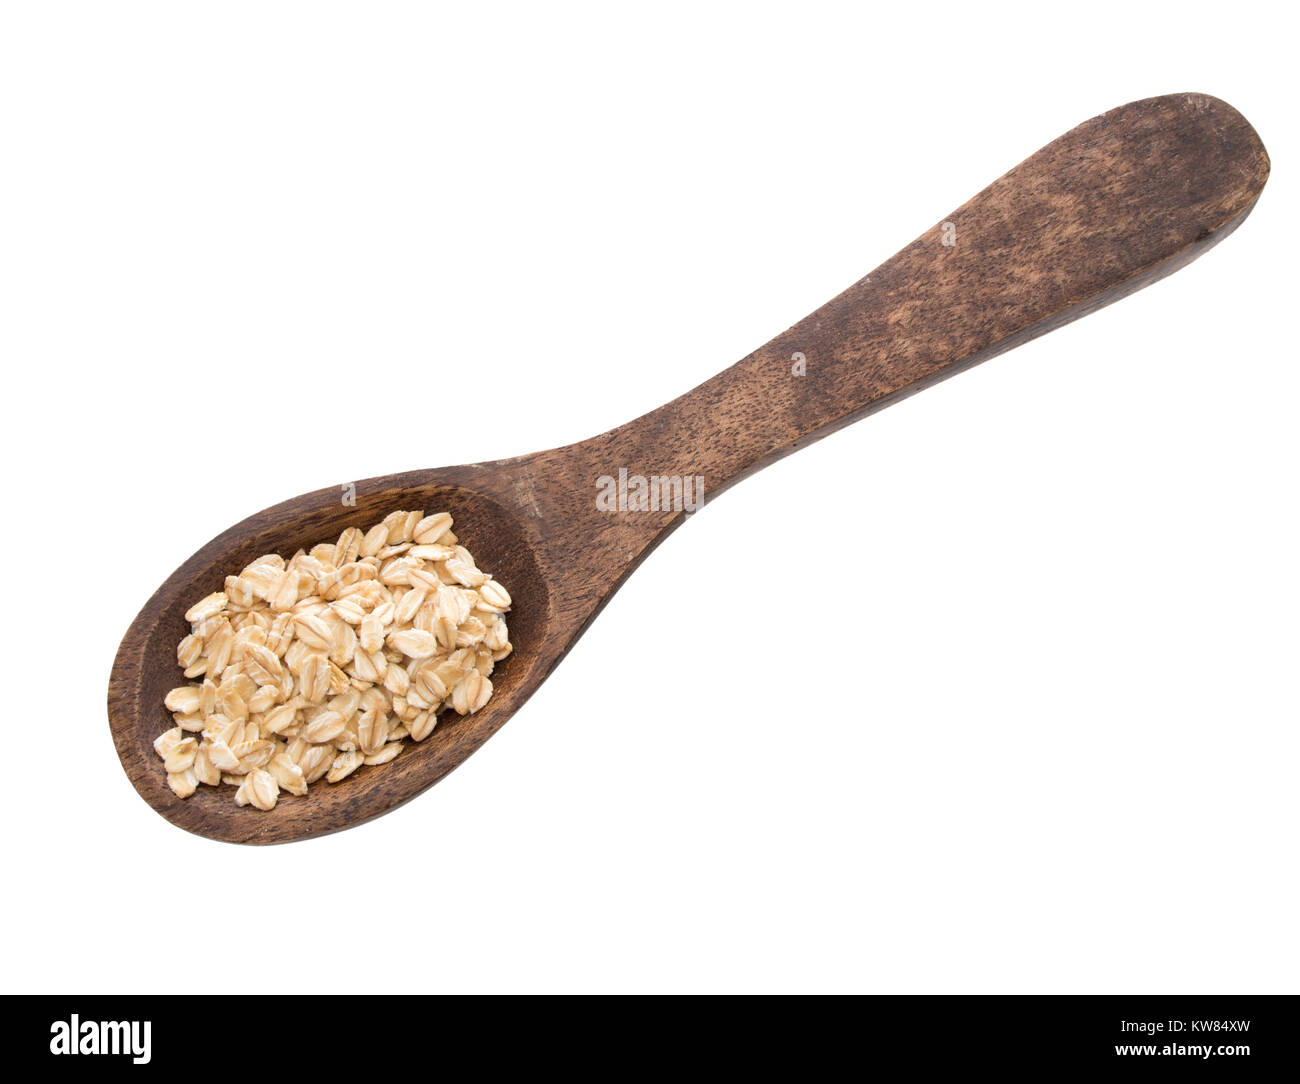 Spoon of organic whole grain oats, coarsely ground. Isolated on white. Stock Photo